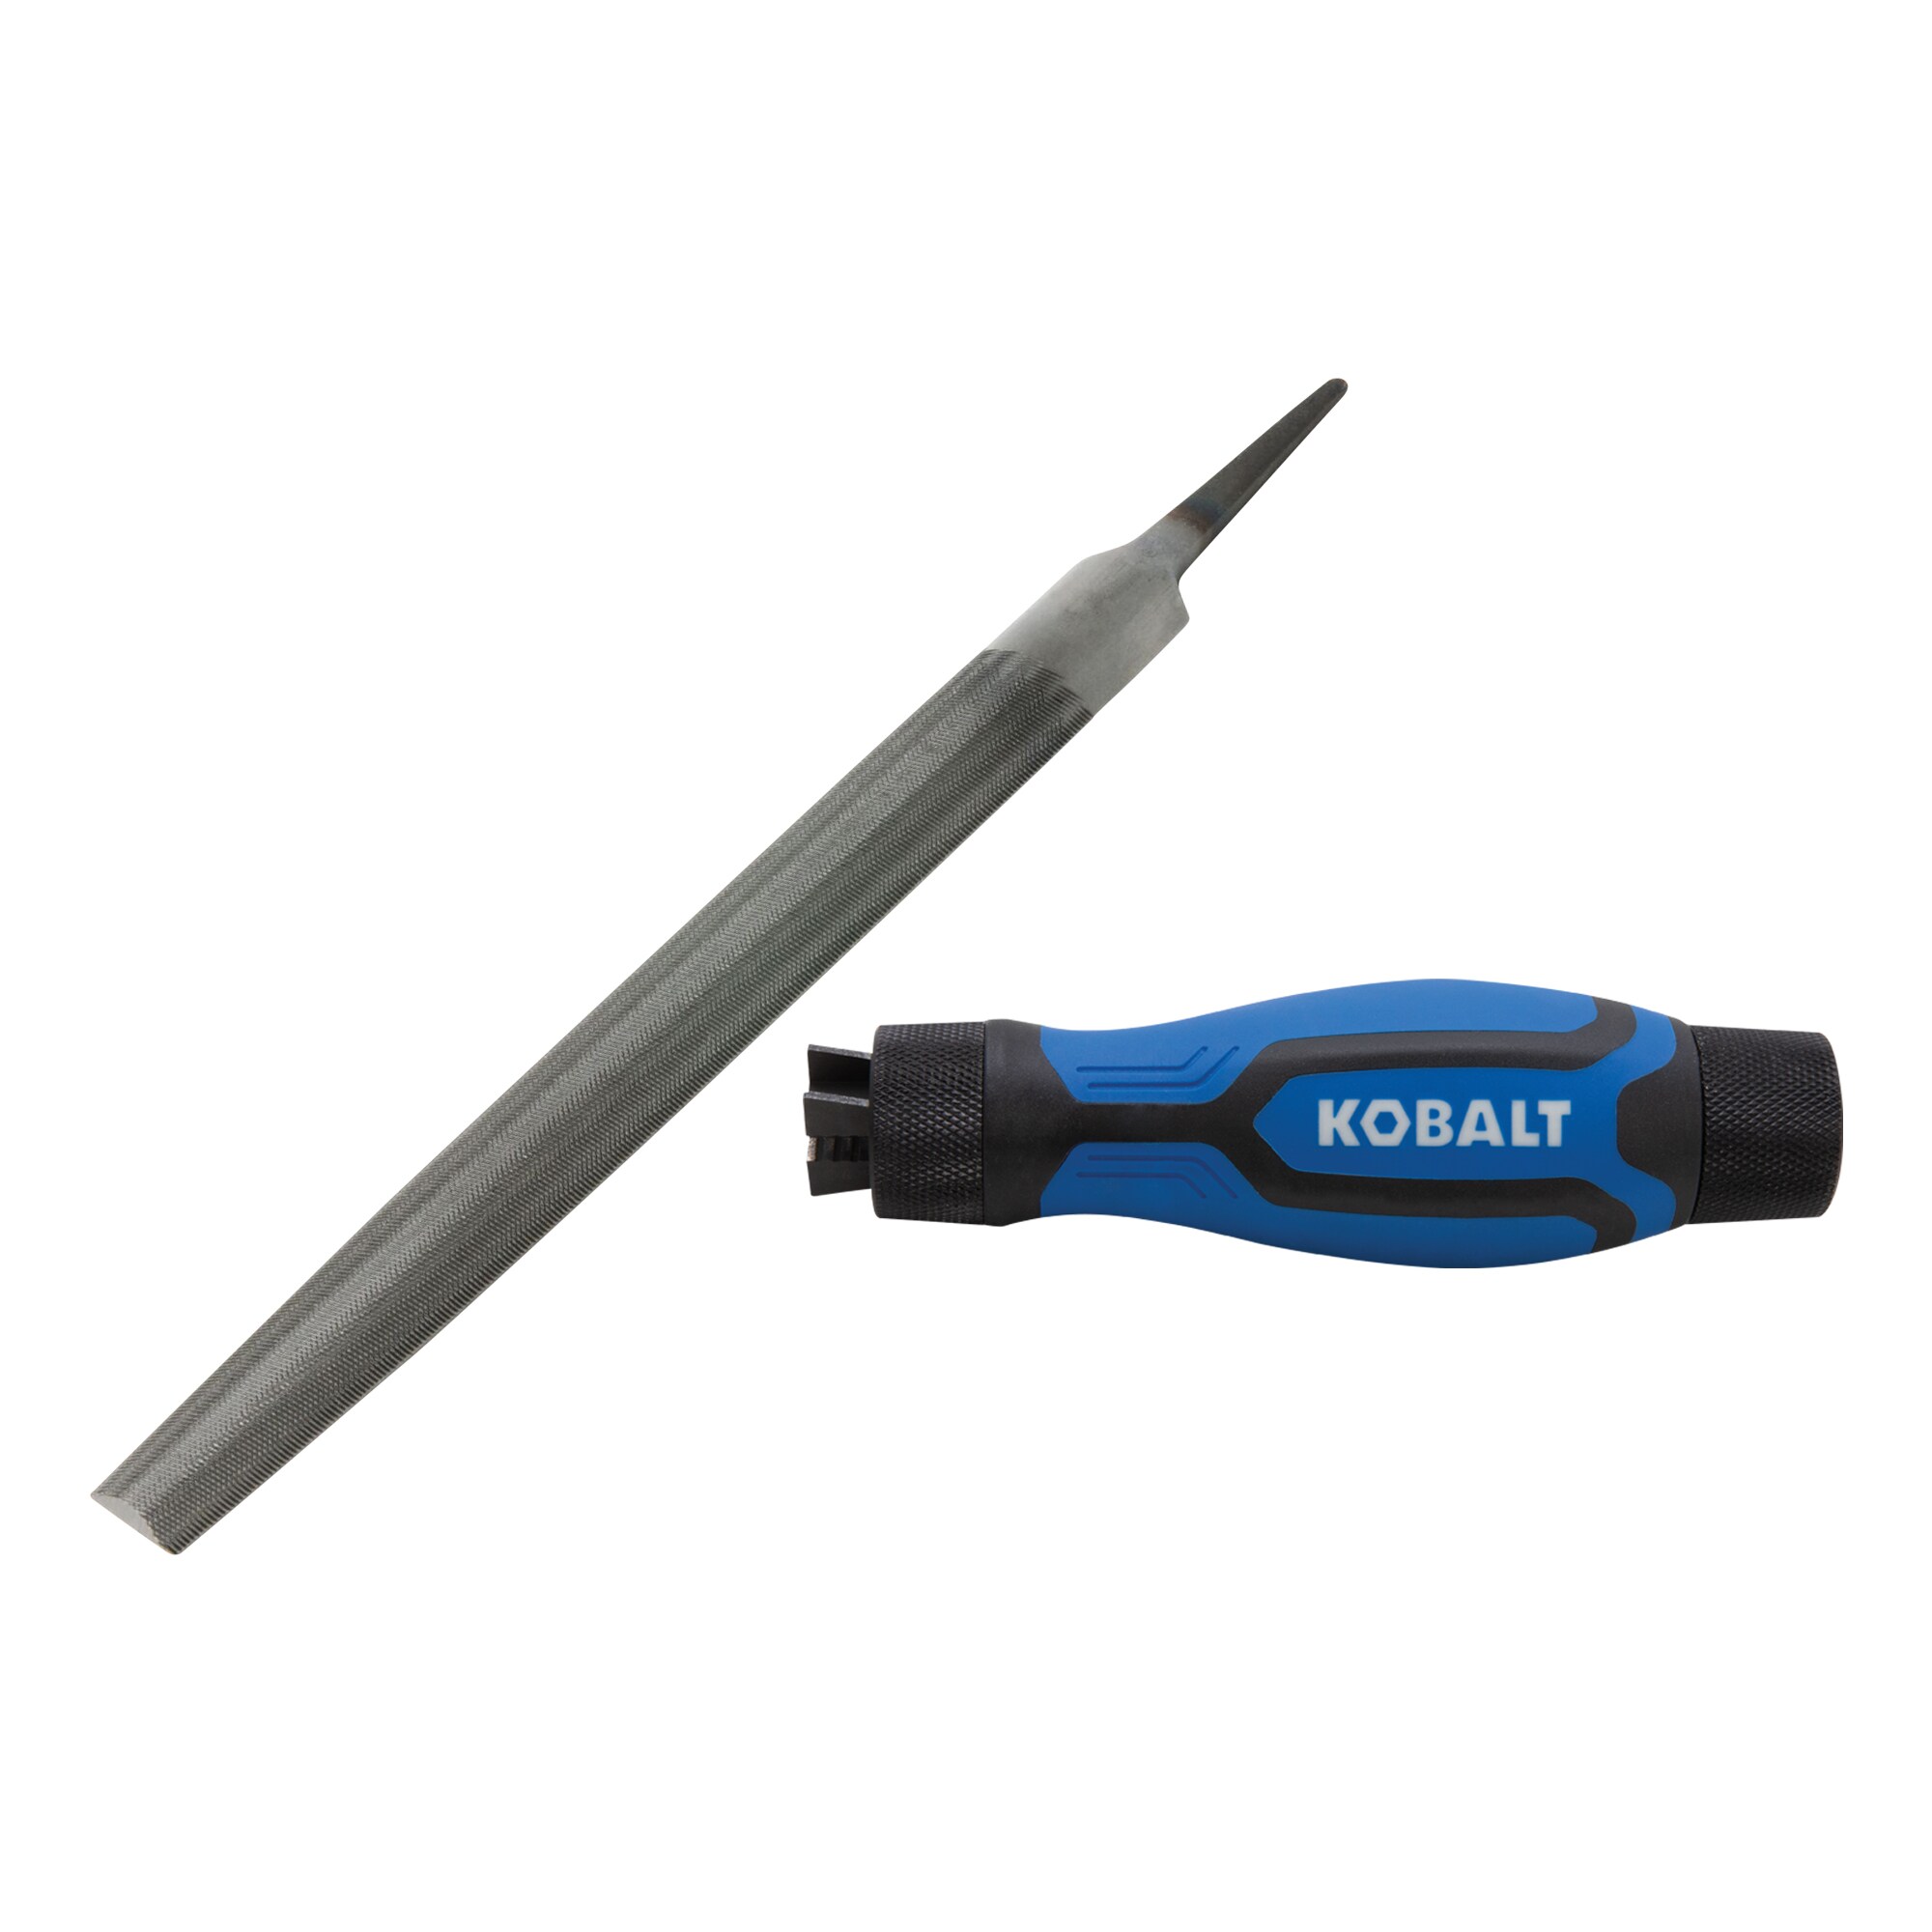 Kobalt 8-in. Half-round Double-cut Bastard File with File Handle File